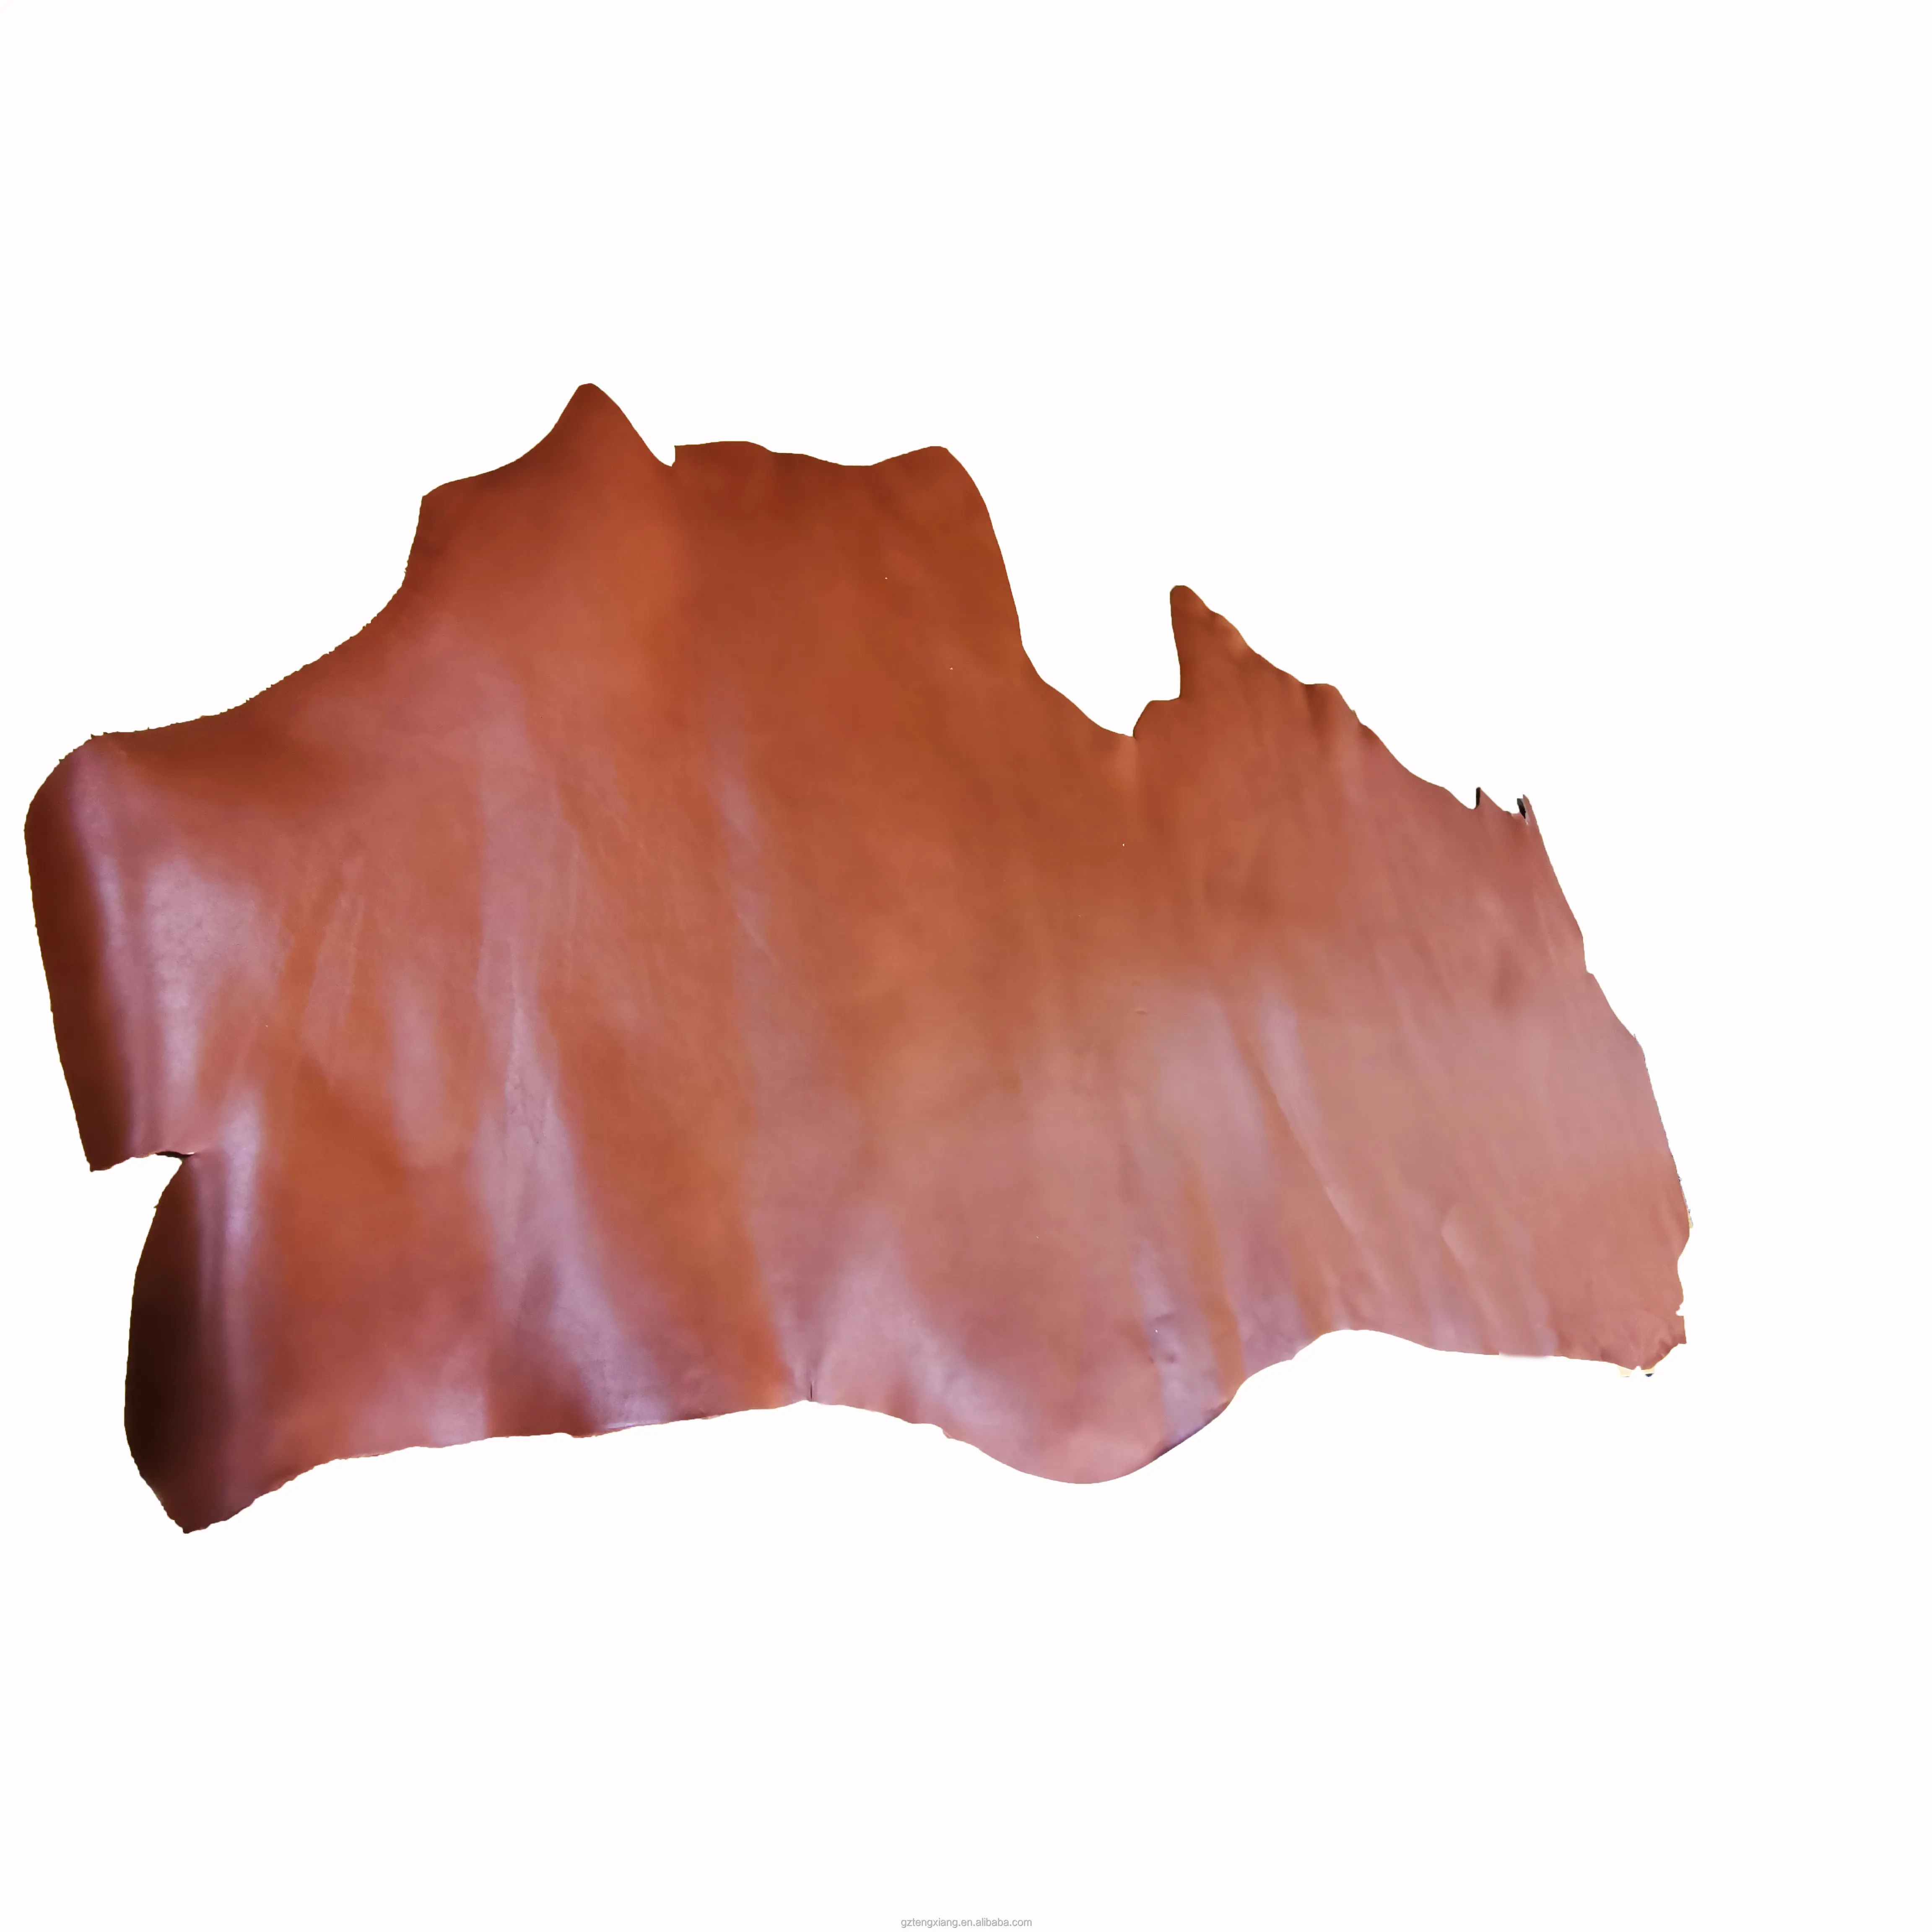 100% cowhide naturally cow skin vegetable tanning leather genuine leather for bag shoes